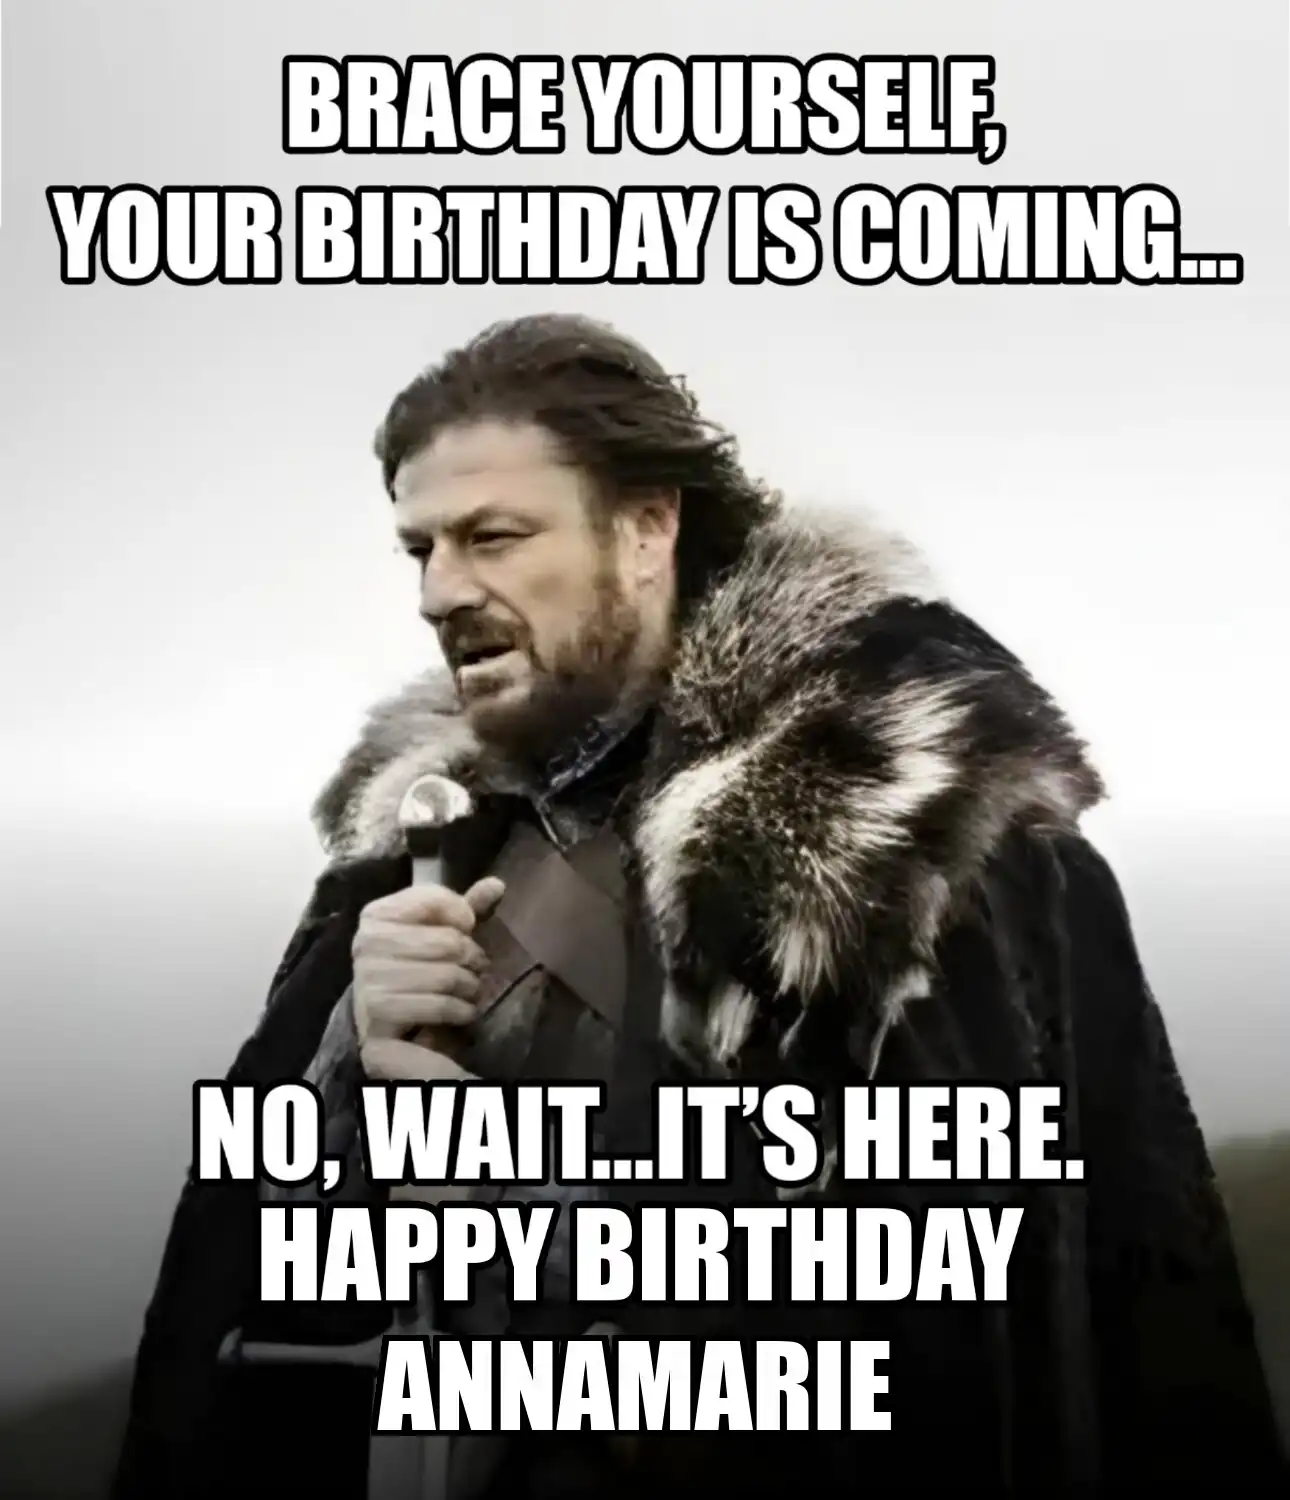 Happy Birthday Annamarie Brace Yourself Your Birthday Is Coming Meme